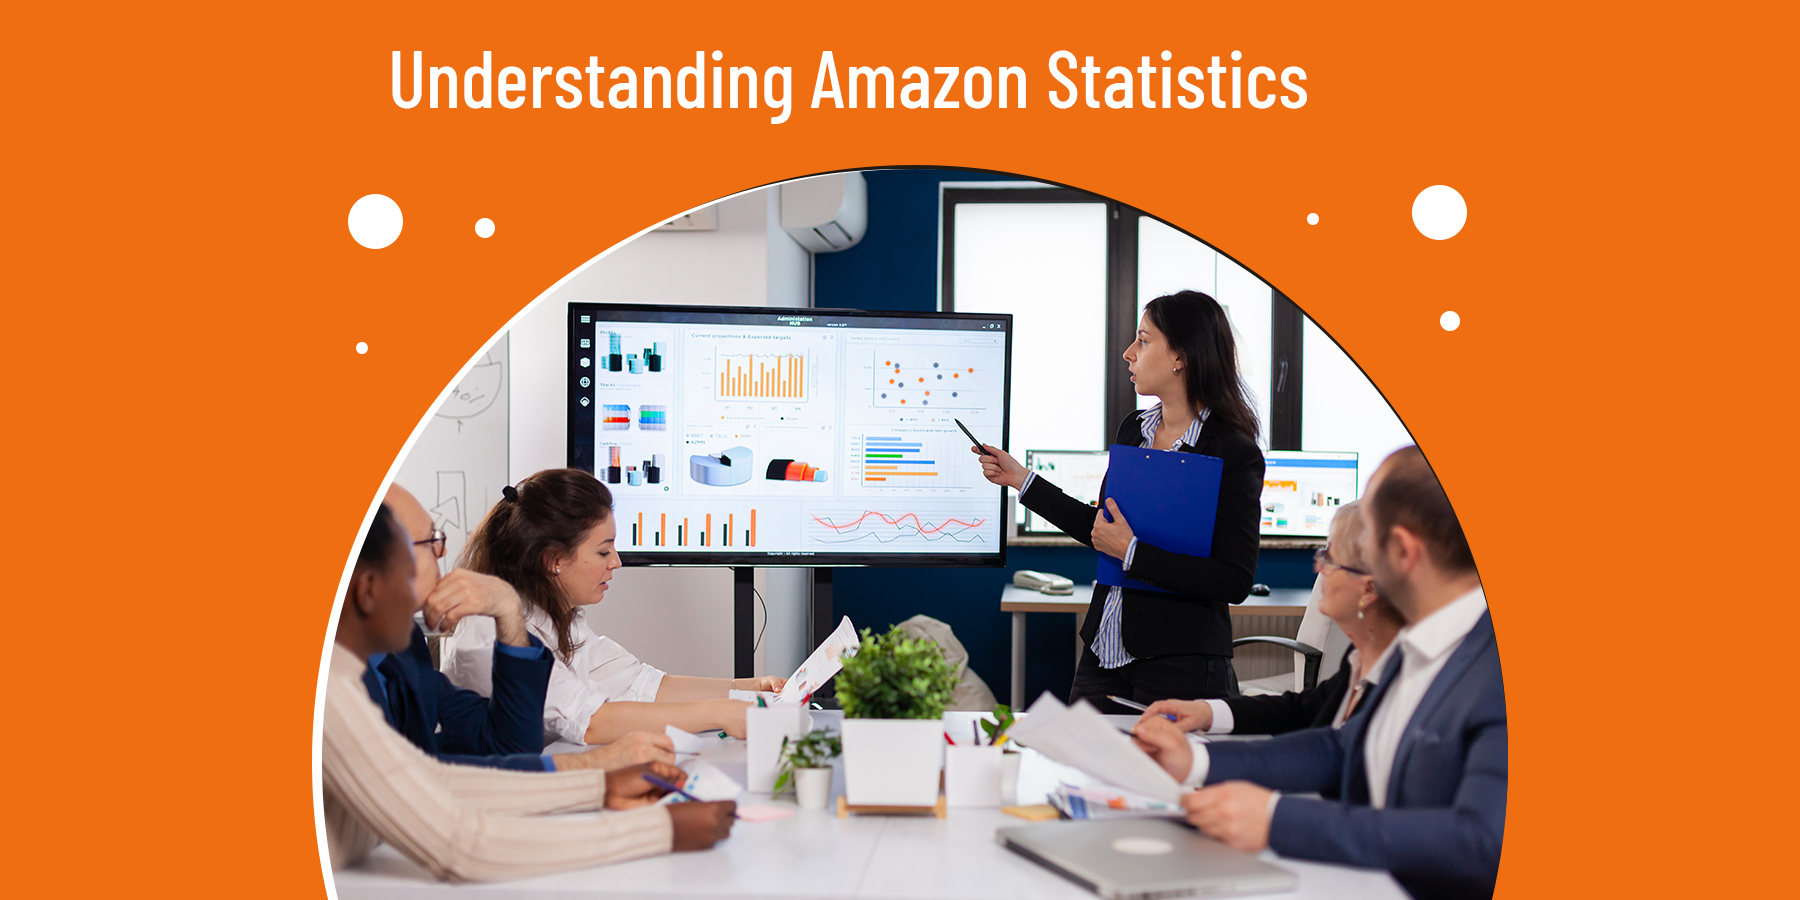 Top 21 Amazon Statistics You Should Know In 2021